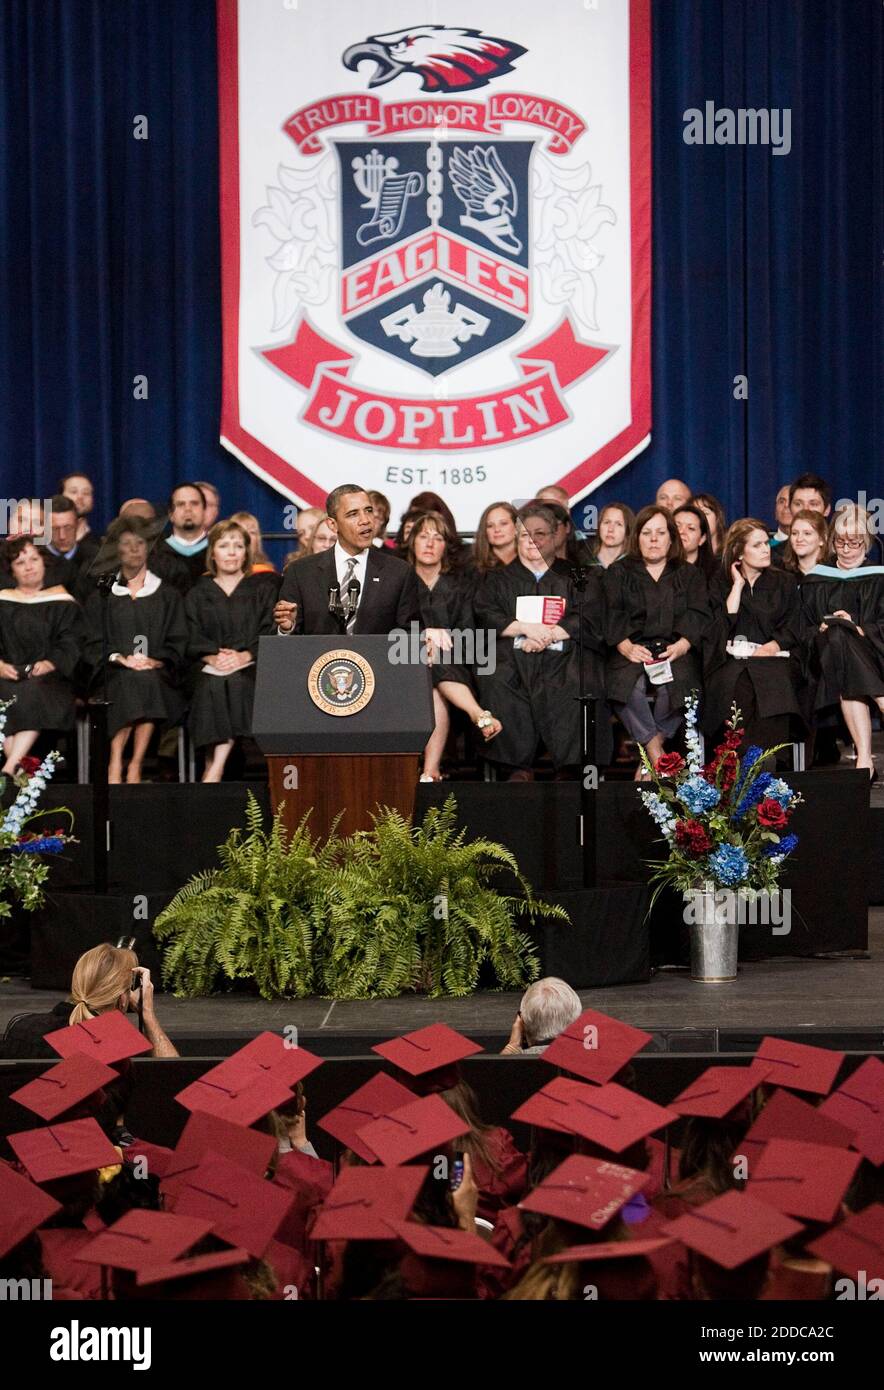 NO FILM, NO VIDEO, NO TV, NO DOCUMENTARY - President Barack Obama delivered his commencement speech during the Joplin High School Commencement Exercises for the Class of 2012 at the Missouri Southern State University Leggett & Platt Athletic Center on Monday, May 21, 2012, in Joplin, Missouri. President Barack Obama spoke at the event in commemoration of the one year anniversary of the city being struck by an EF-5 tornado. Photo by Shane Keyser/Kansas City Star/MCT/ABACAPRESS.COM Stock Photo